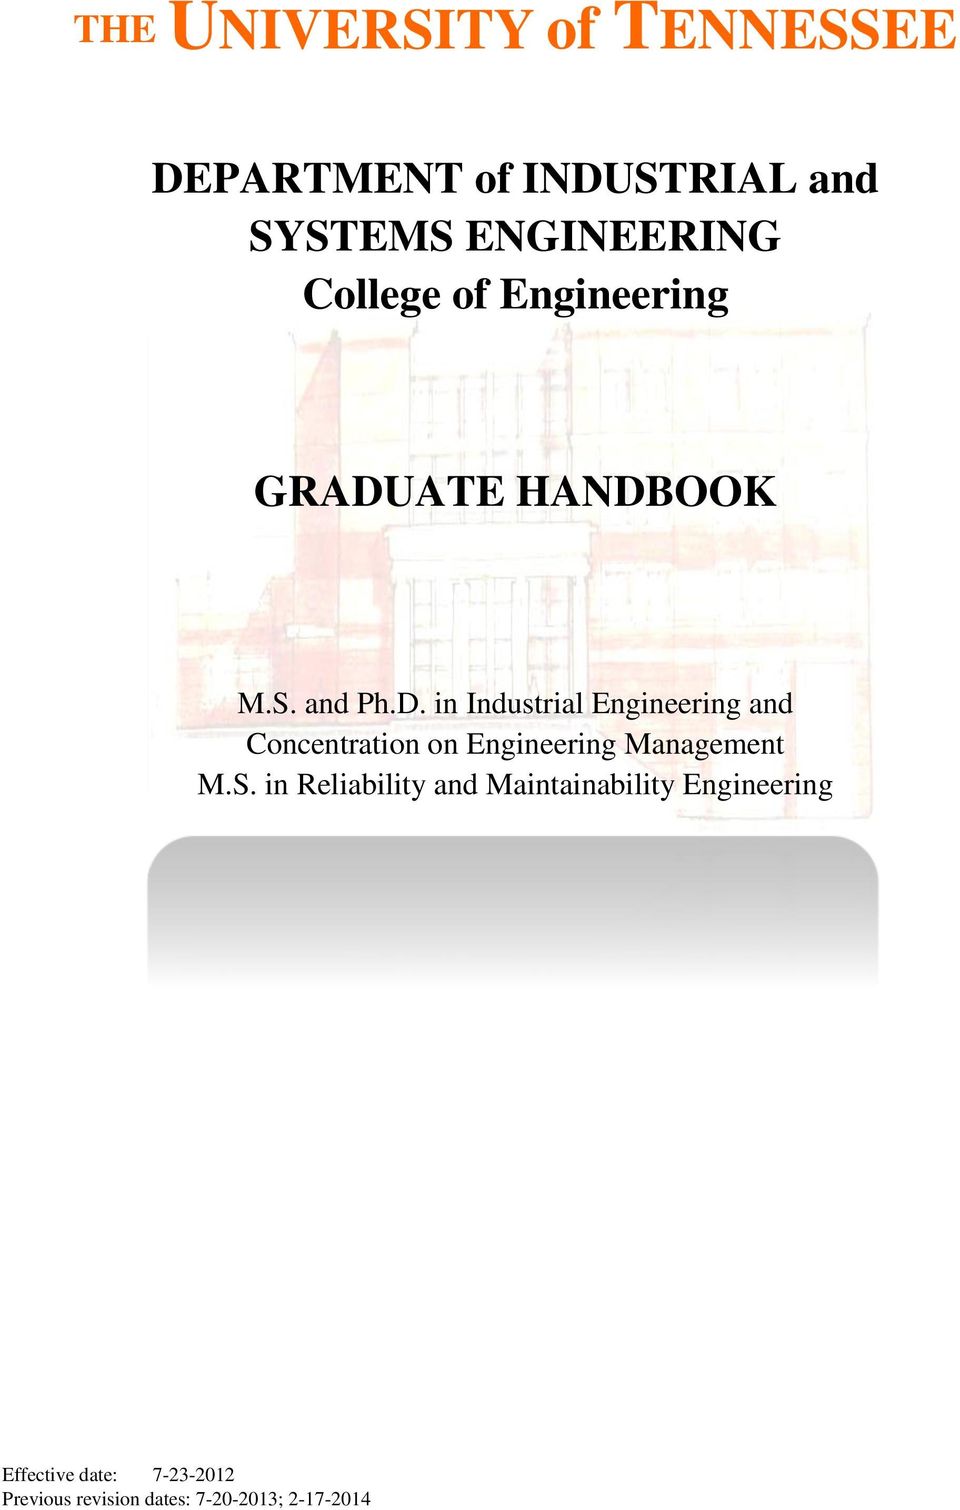 ATE HANDBOOK M.S. and Ph.D. in Industrial Engineering and Concentration on Engineering Management M.